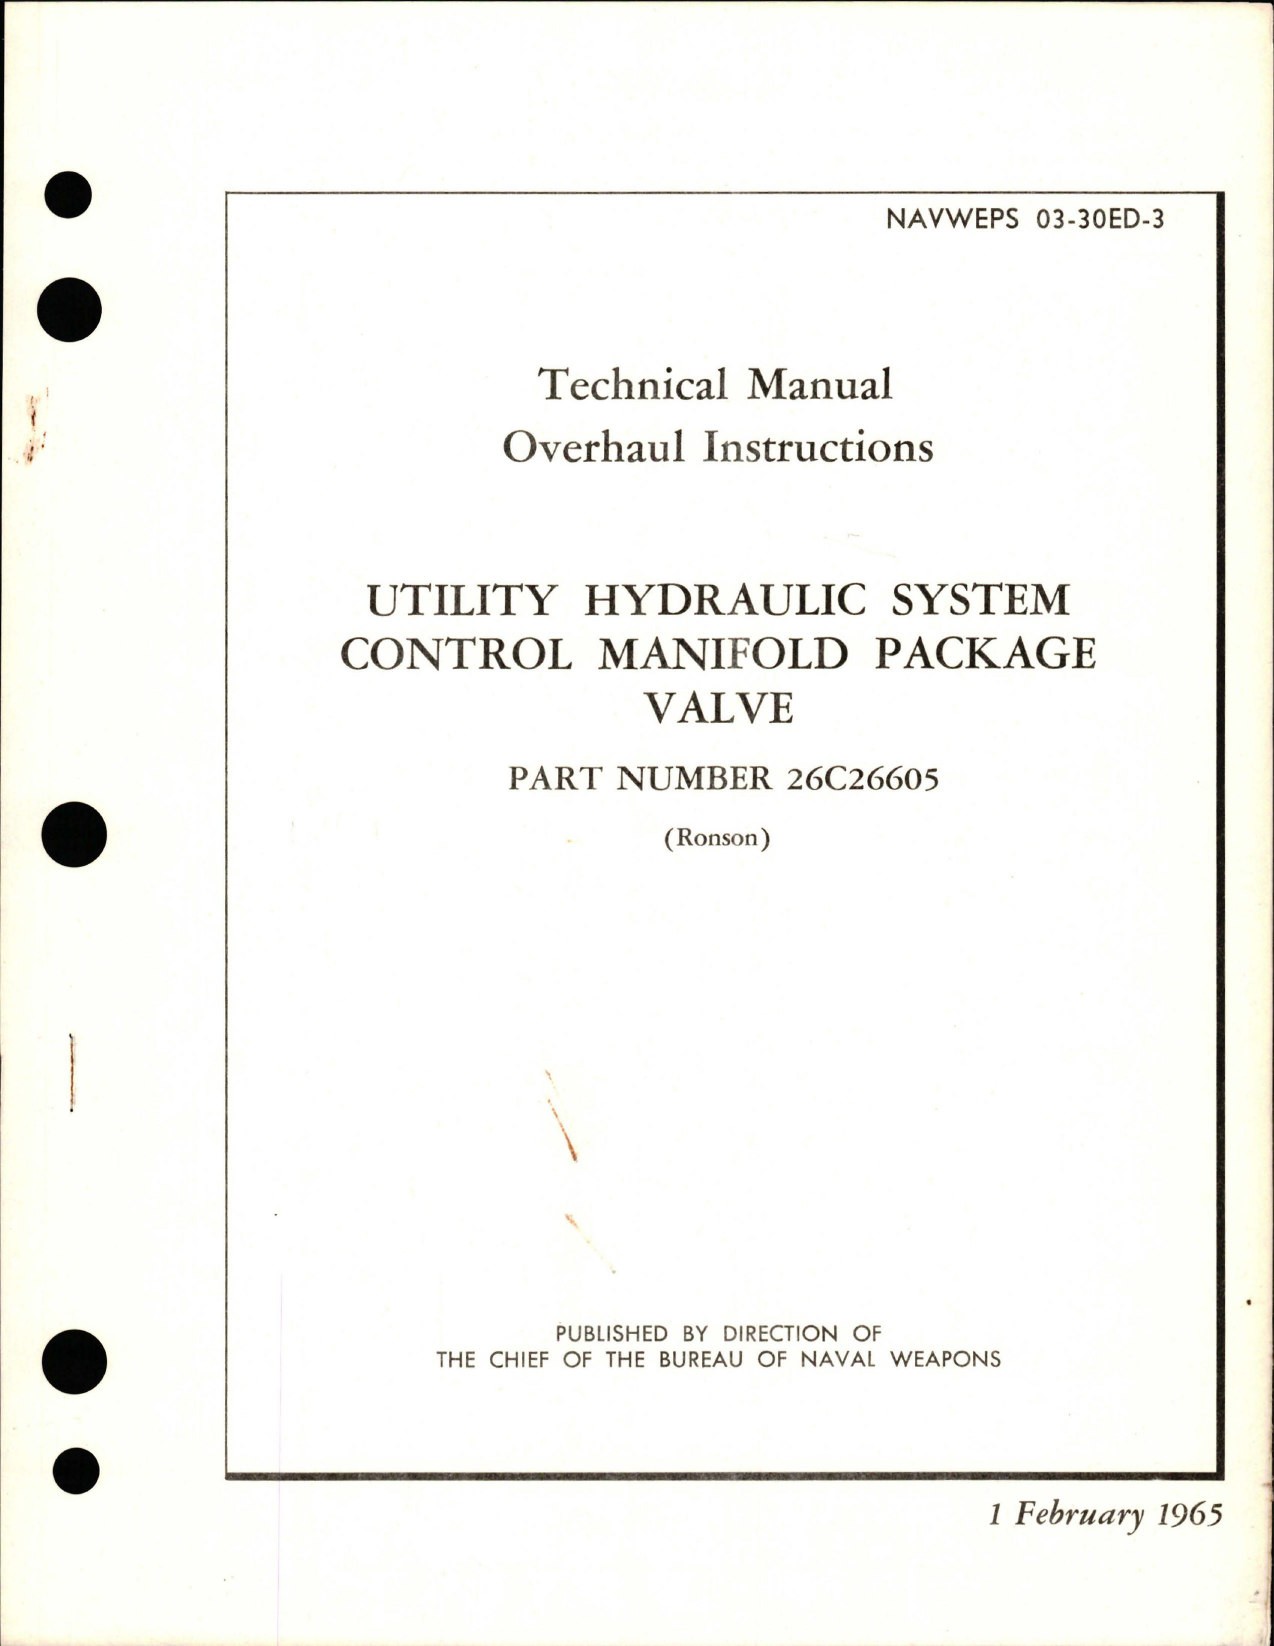 Sample page 1 from AirCorps Library document: Overhaul Instructions for Utility Hydraulic System Control Manifold Package Valve - Part 26C26605